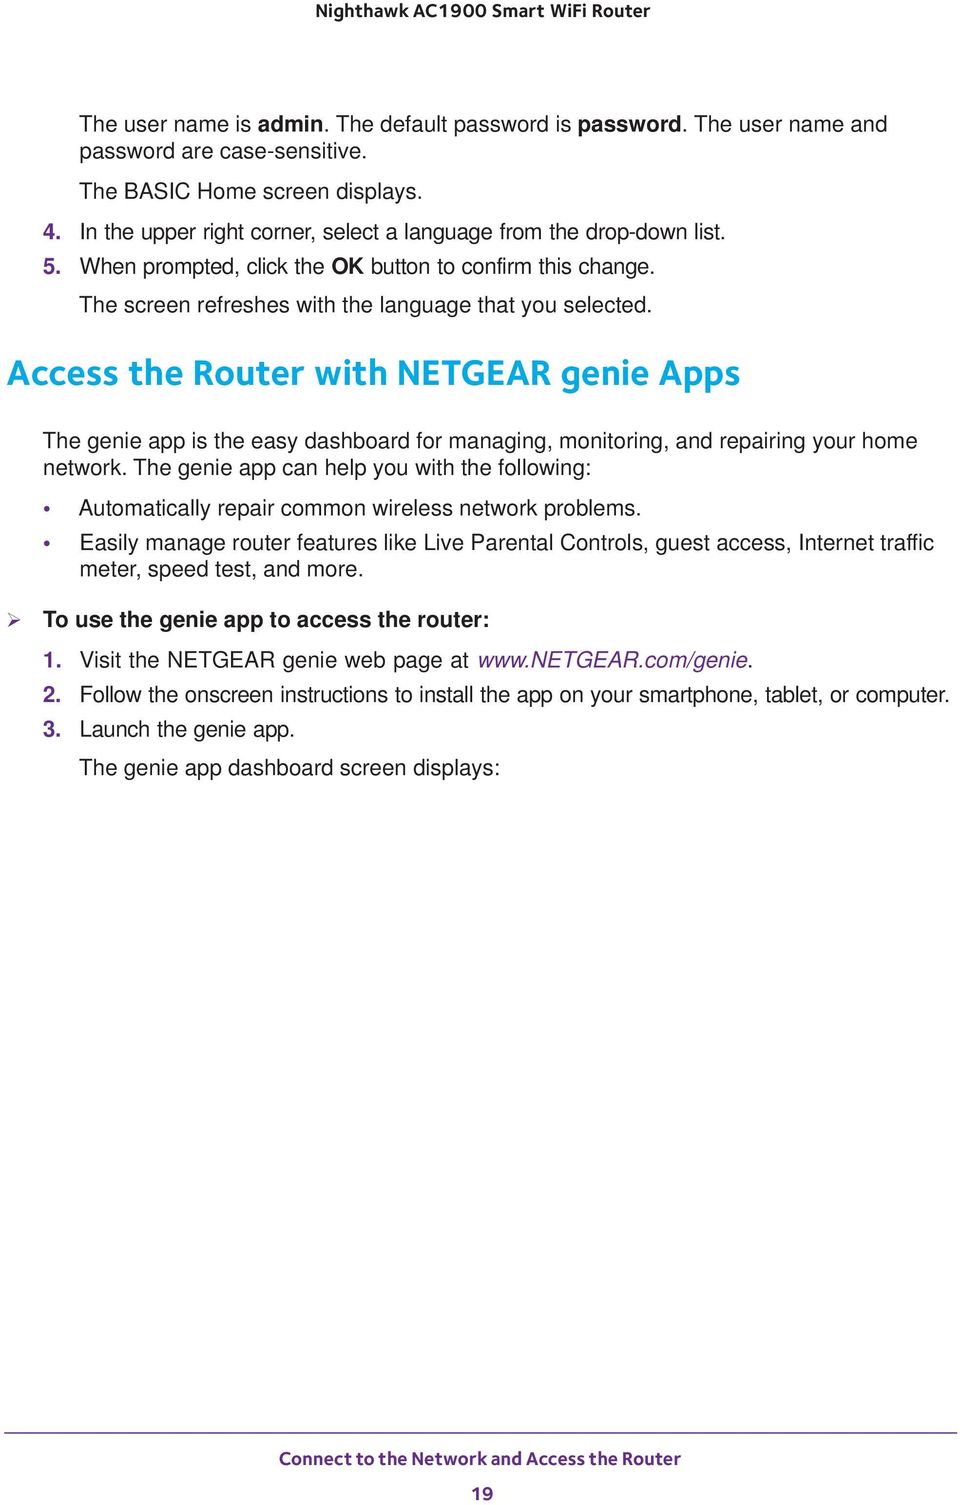 common wireless network problems. Easily manage router features like Live Parental Controls, guest access, Internet traffic meter, speed test, and more. To use the genie app to access the router: 1.